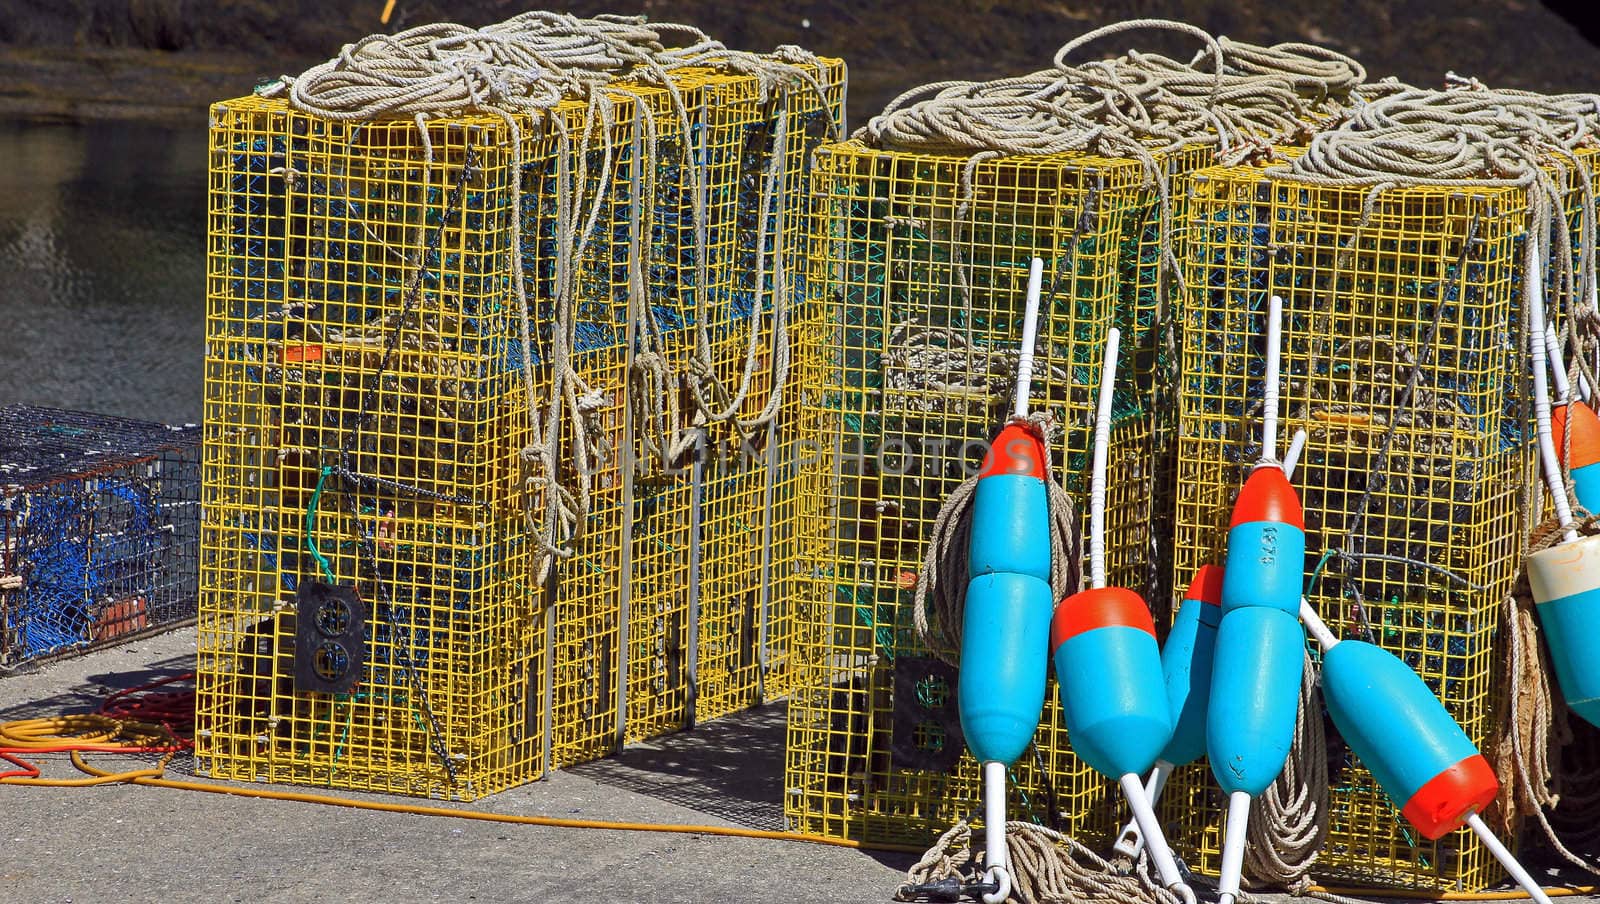 Lobster buoys leaning on cages on fishing wharf